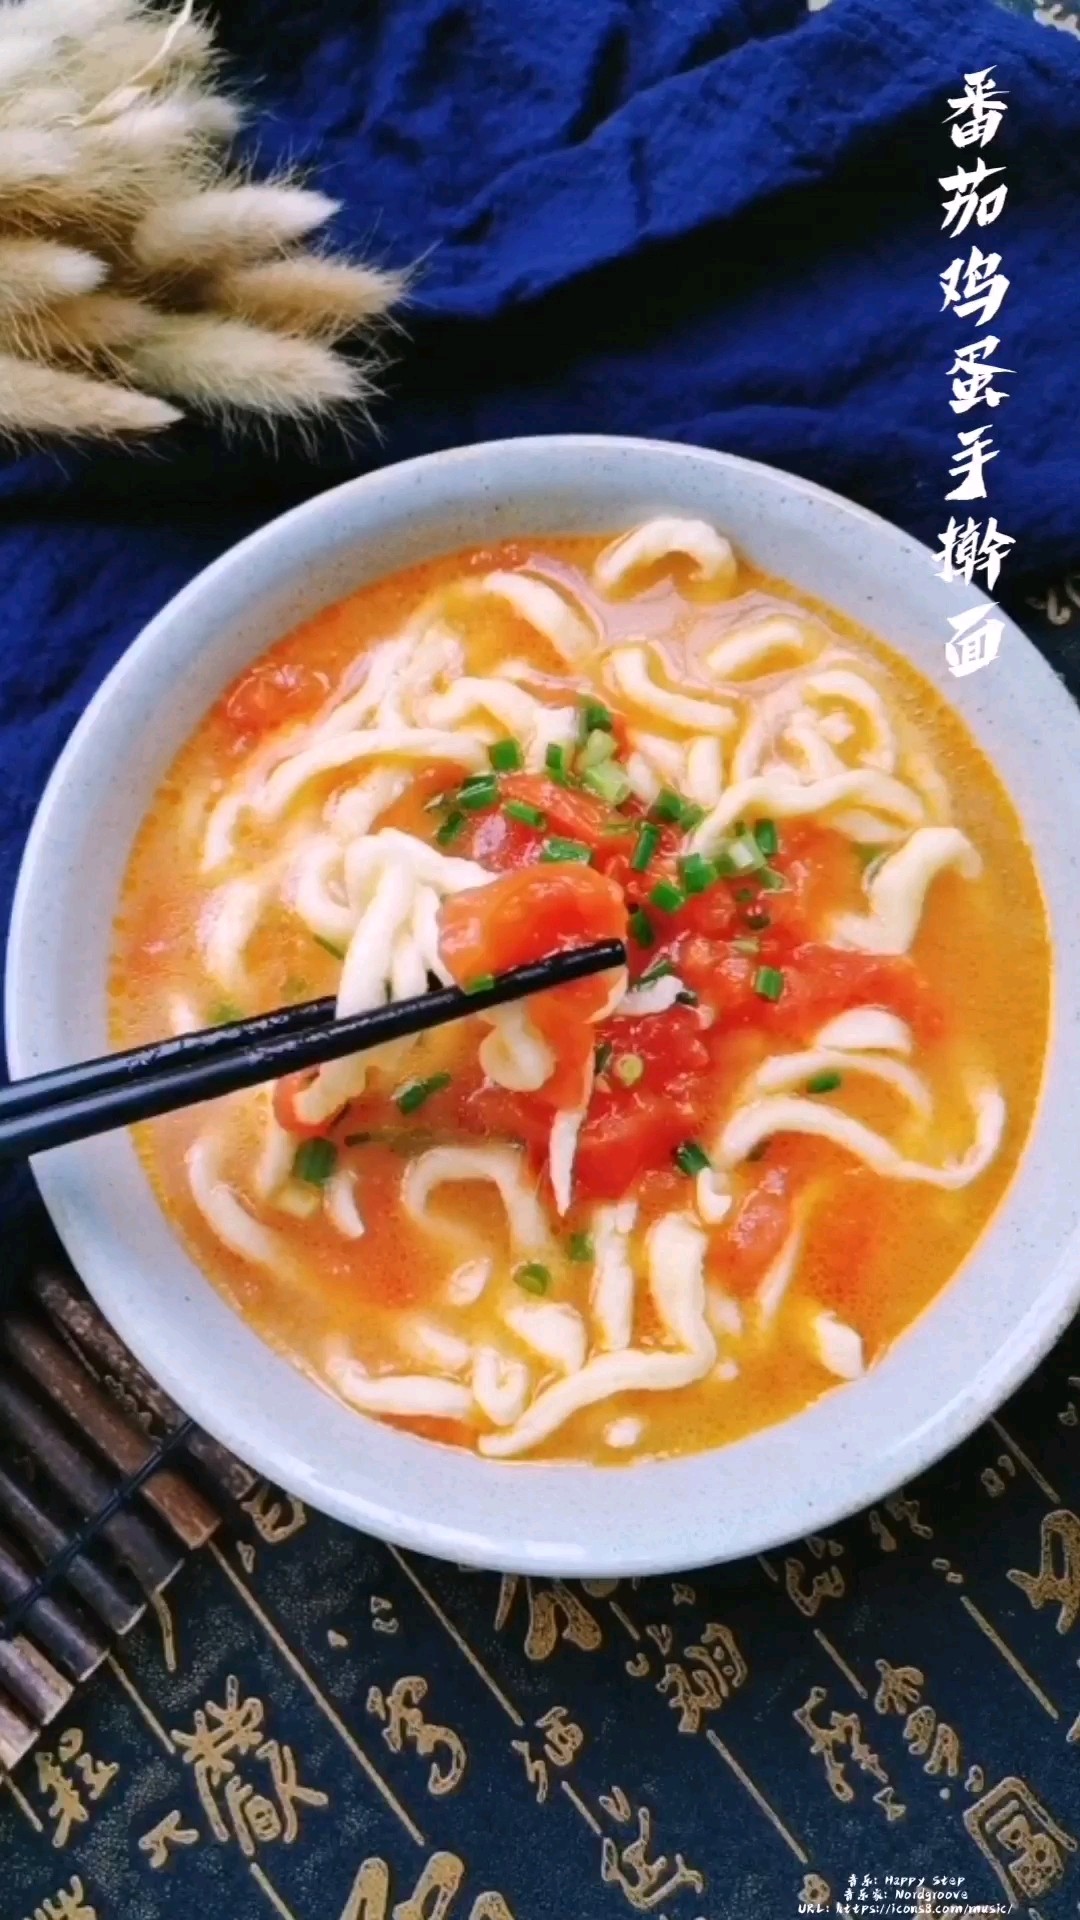 Hand-rolled Noodles with Tomato and Egg recipe